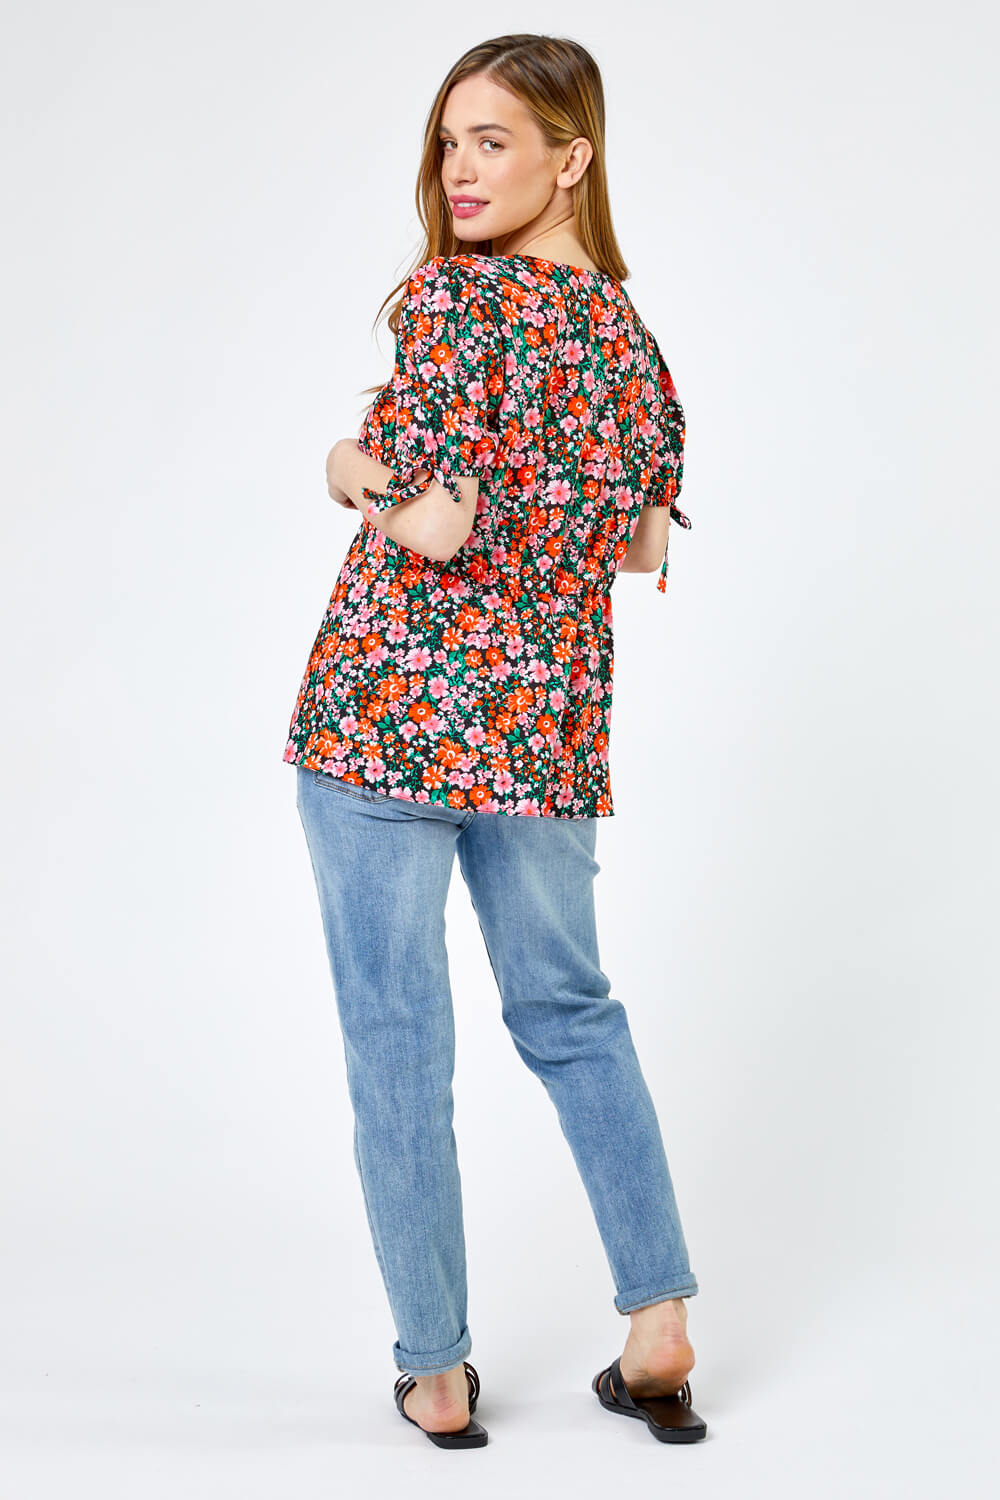 Red Petite Floral Print V Neck Top, Image 2 of 4